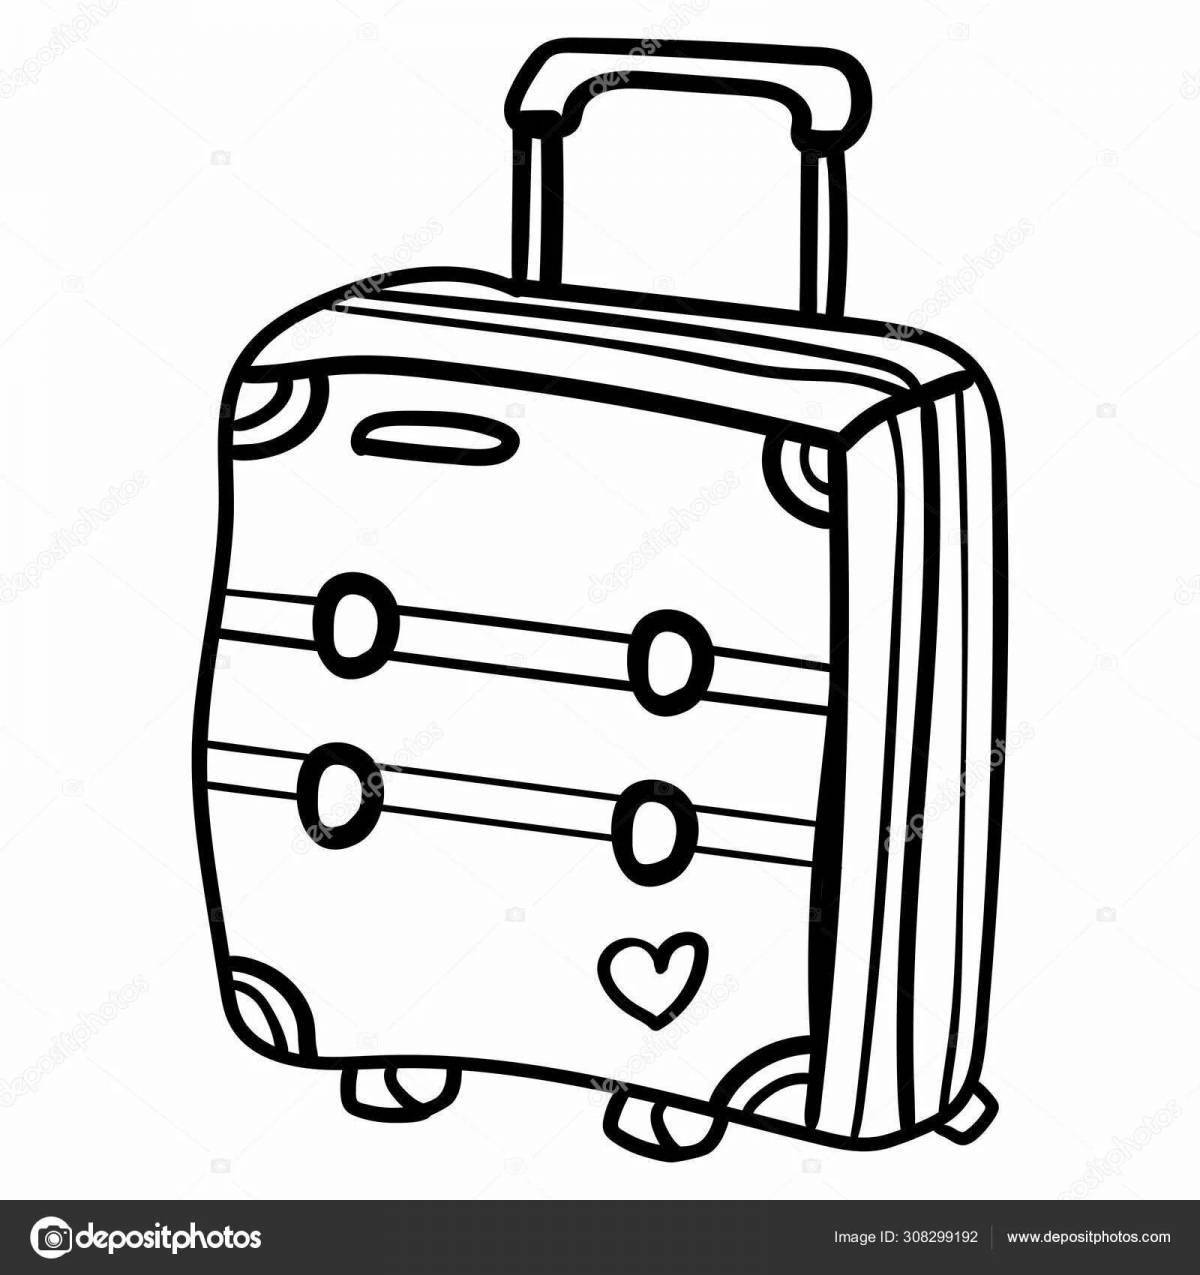 Fabulous suitcase coloring page for kids